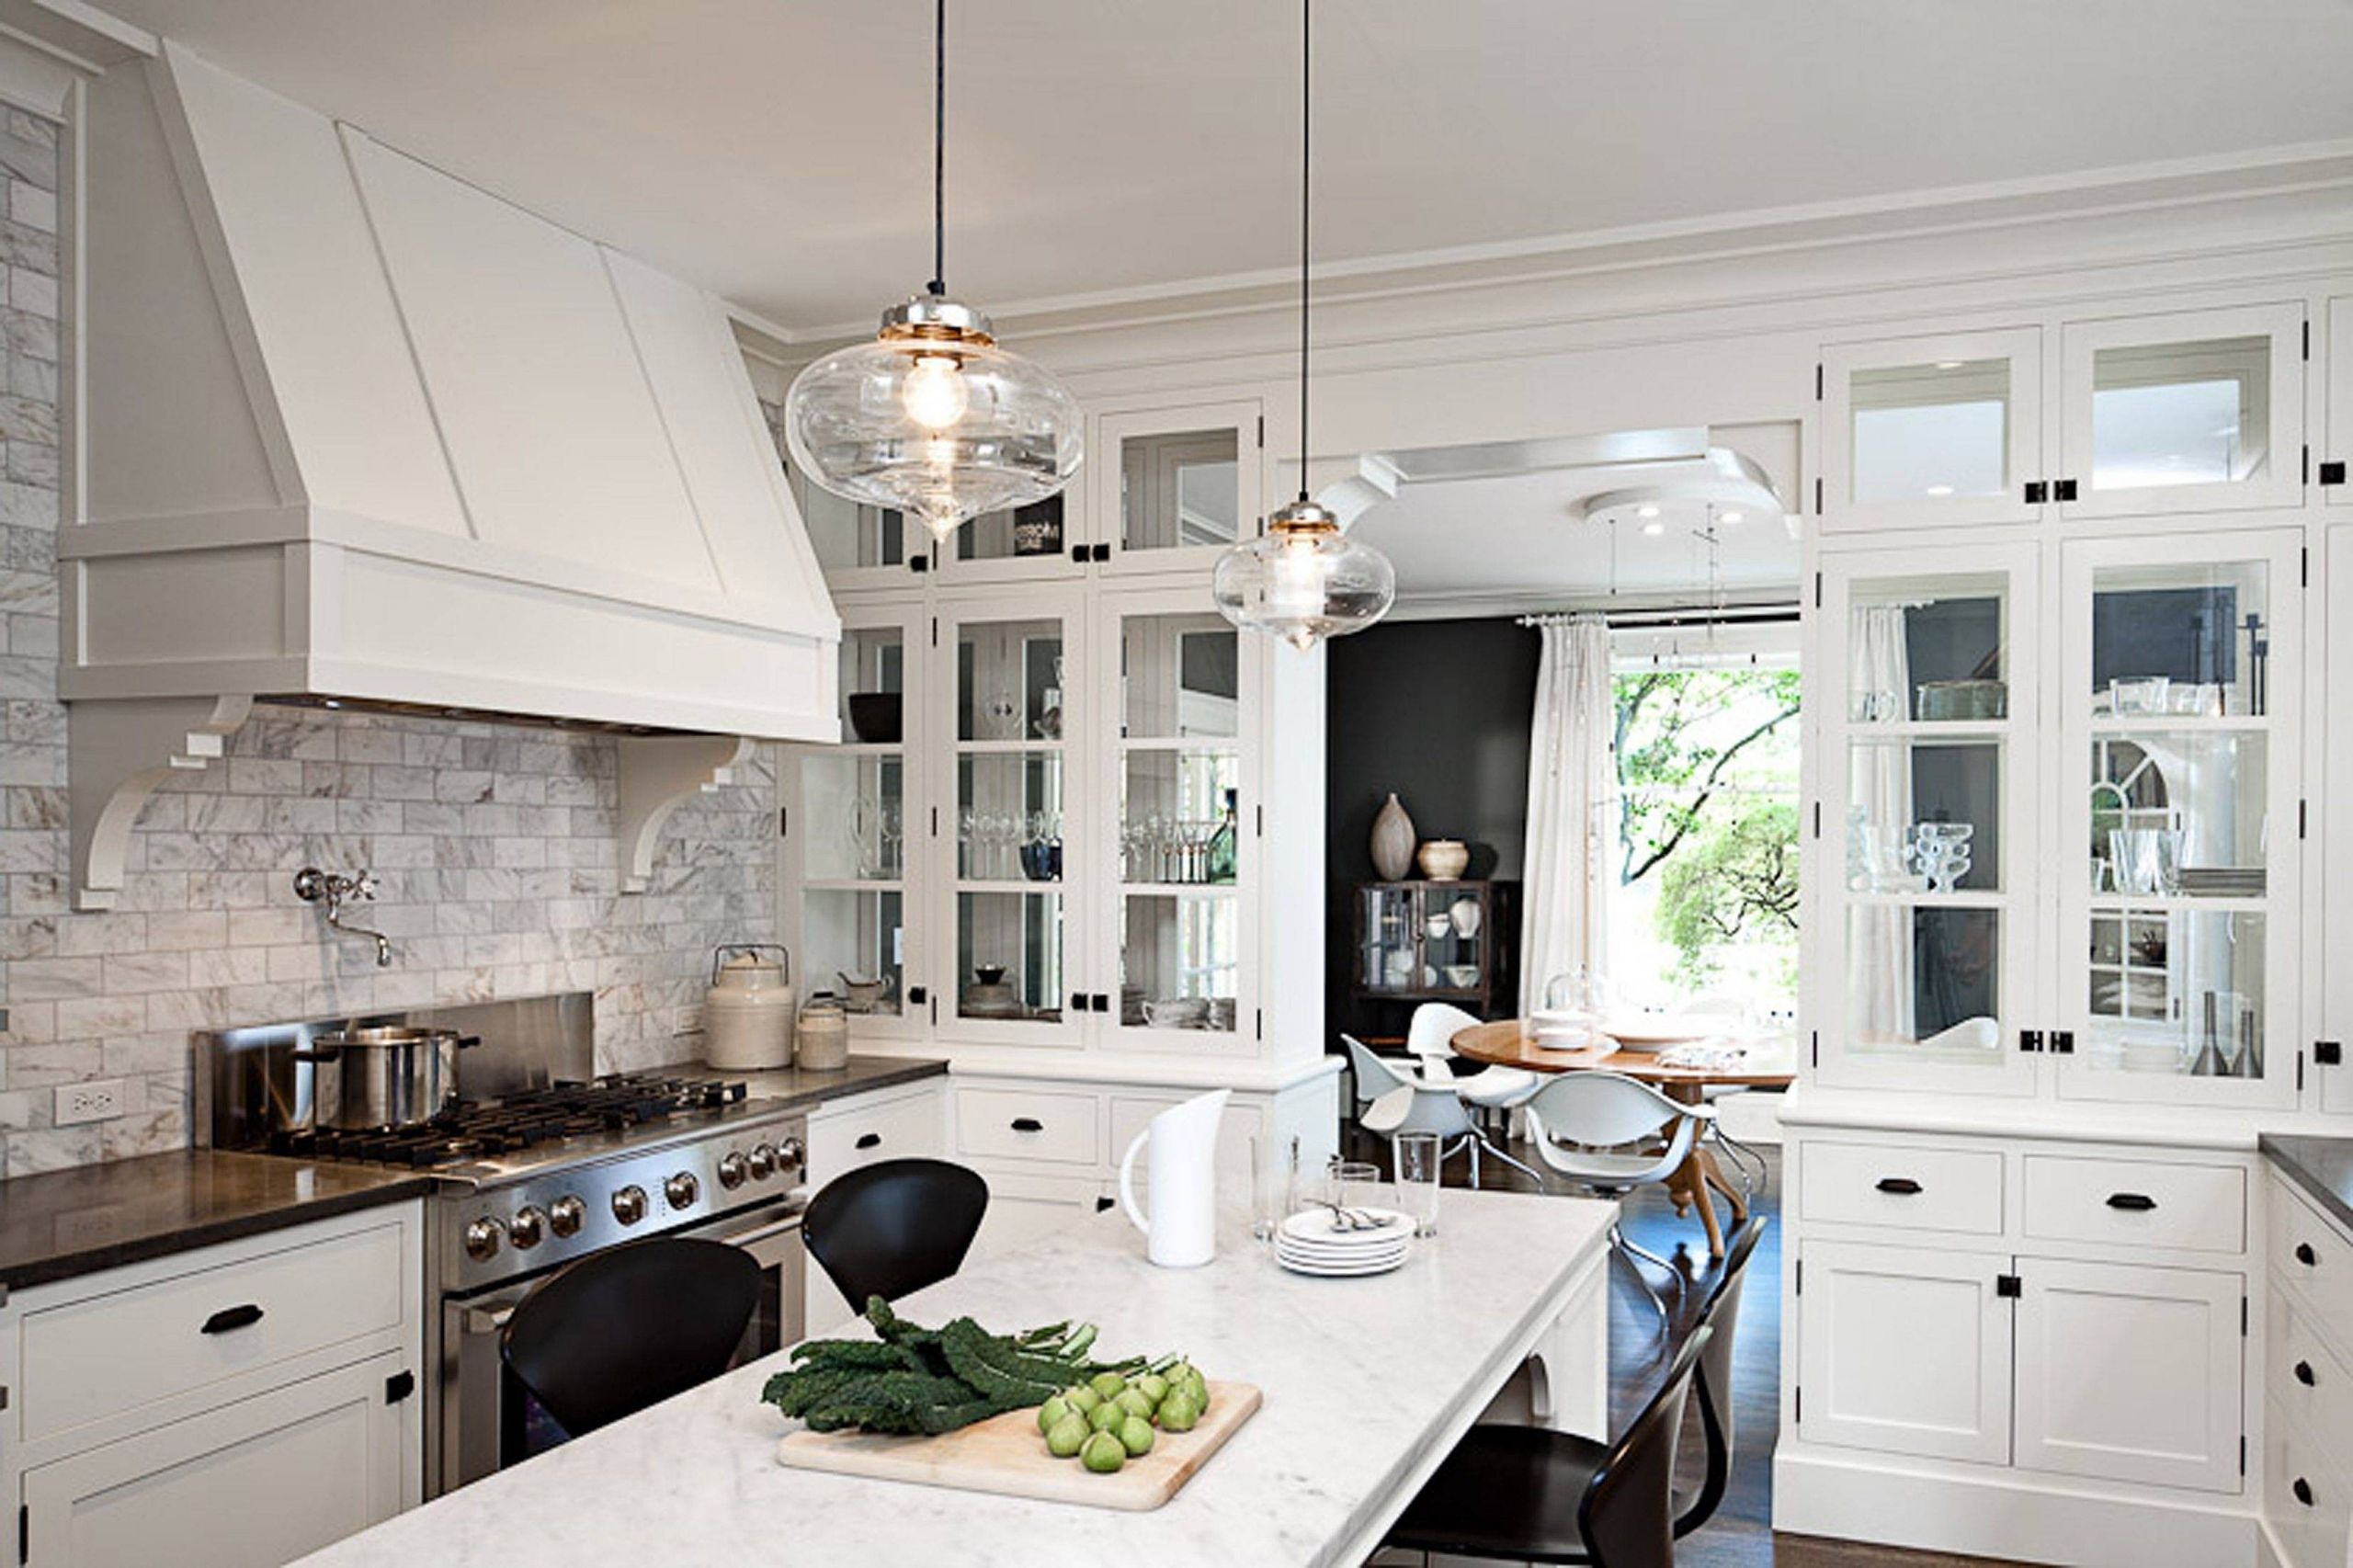 French Country Kitchen Pendant Lighting
 15 Best Collection of Country Pendant Lighting for Kitchen